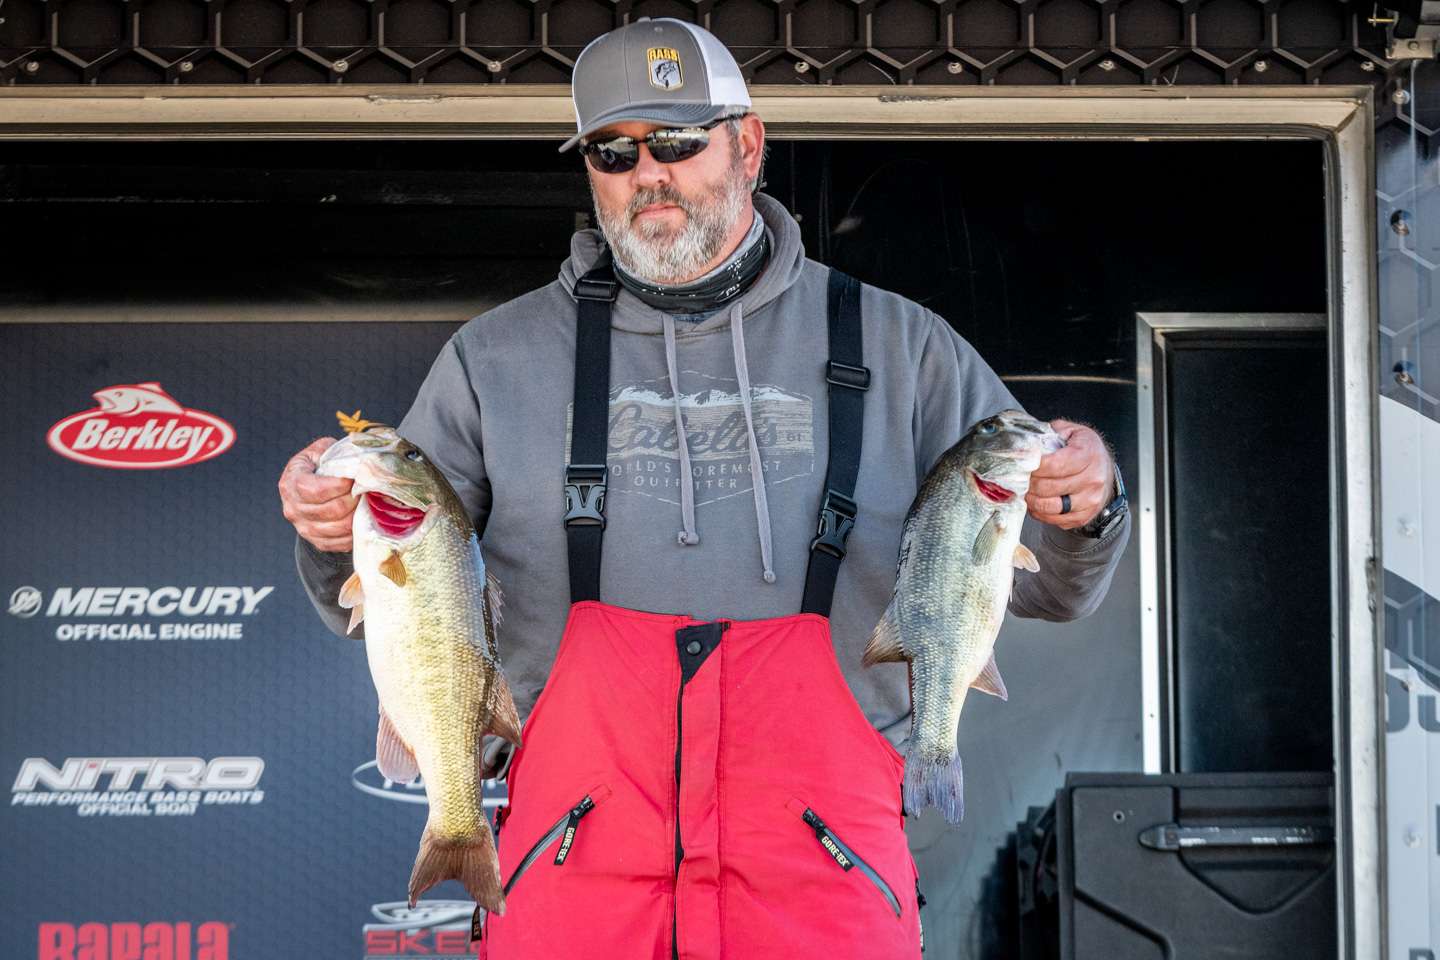 See how the Team anglers fared on the first day of the 2021 Bassmaster Team Championship at Lake Eufaula! <br><br>First up, Geoffrey Mcknight and Jay Estes (13th, 13 - 5)